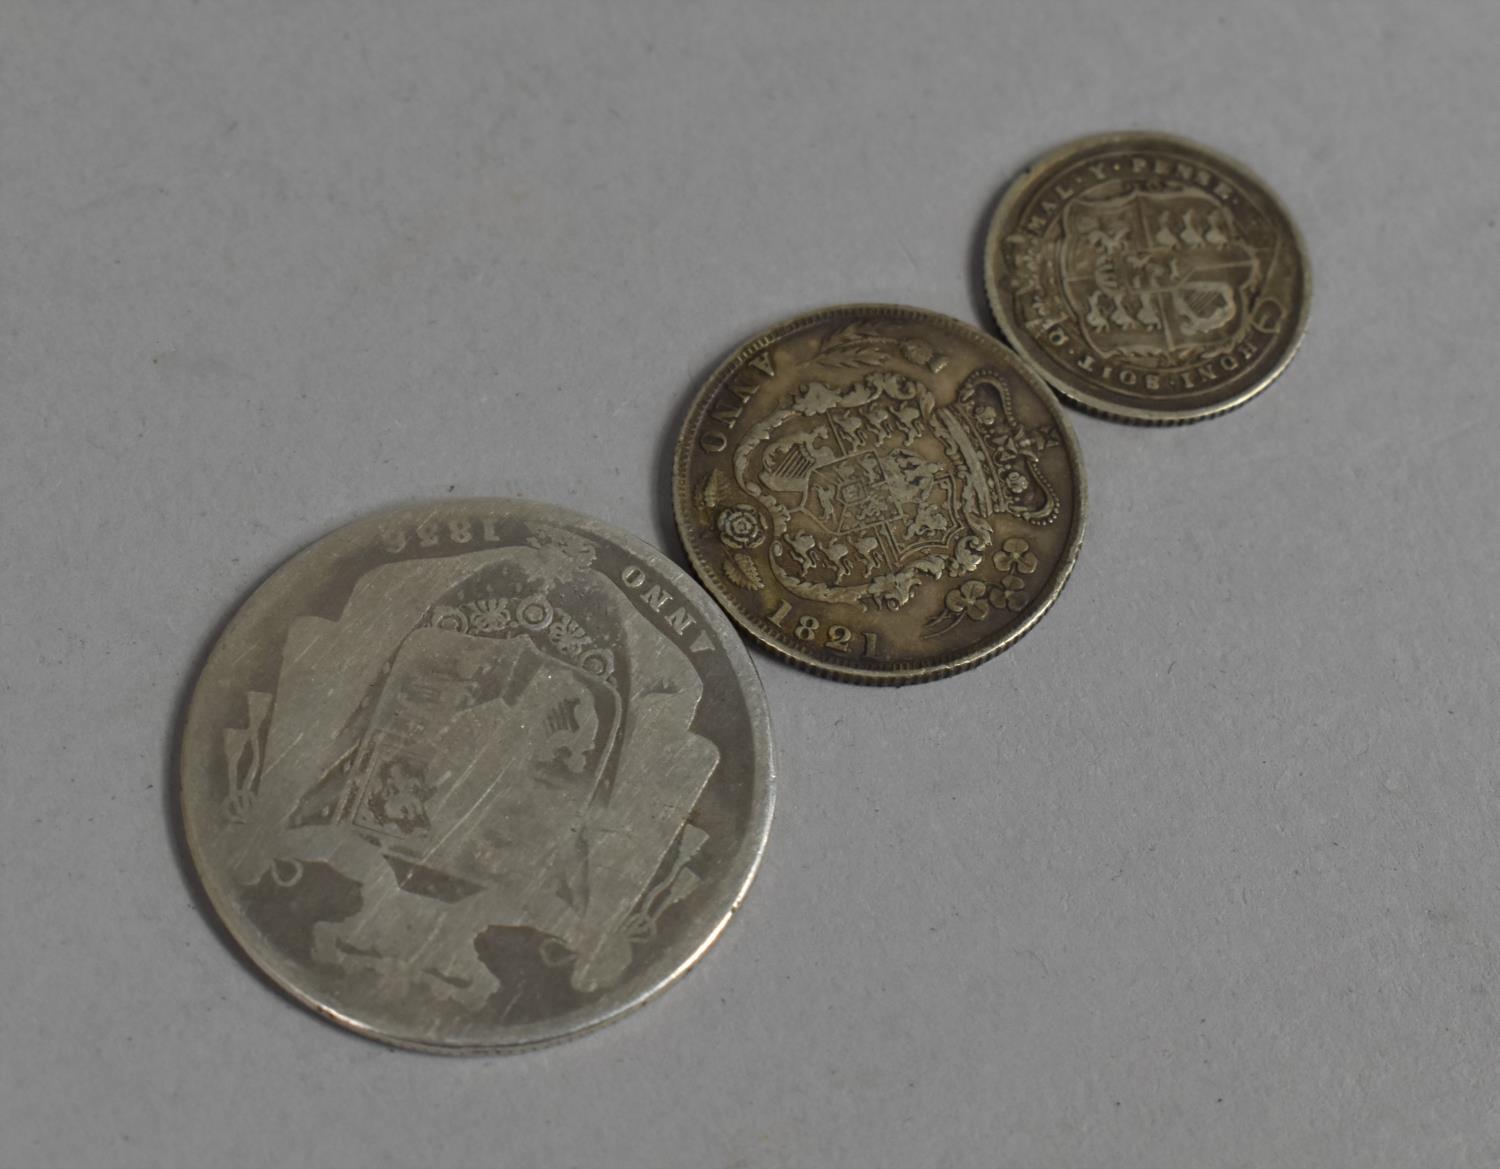 Three Georgian Silver Coins, George III 1816, George IV 1821 and a Further 1836 Coin (Rubbed) - Image 2 of 2